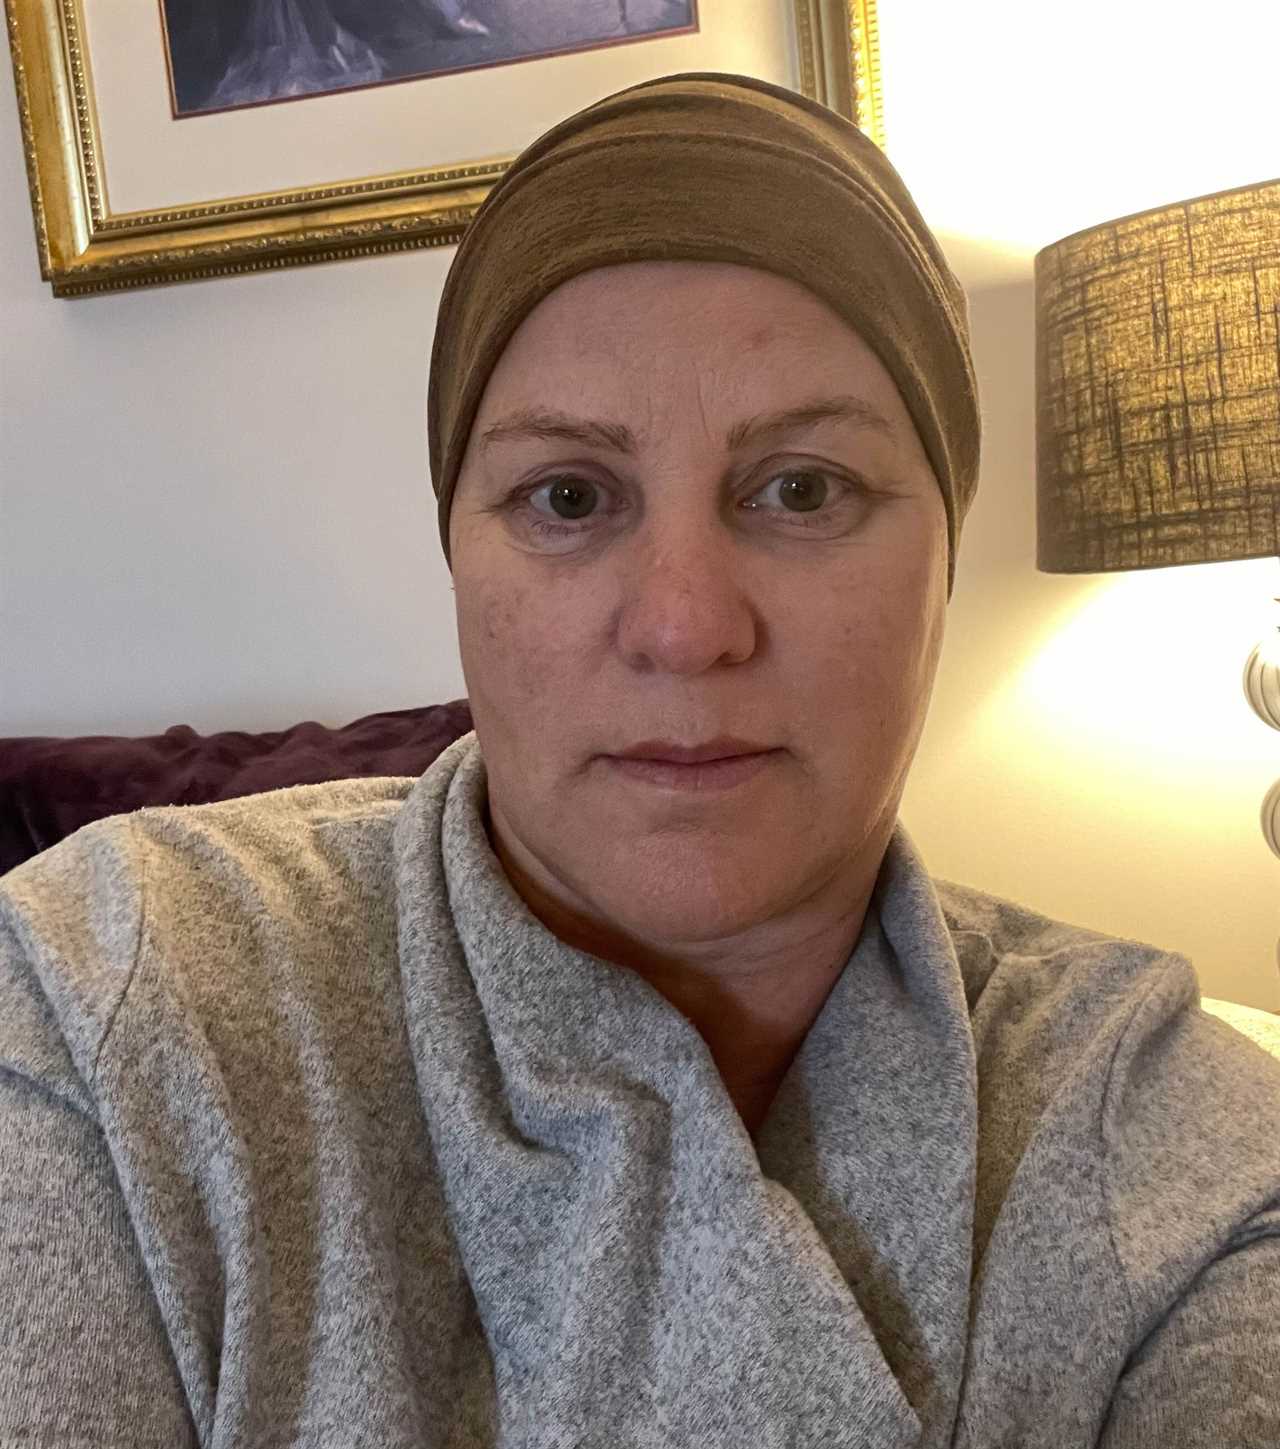 Mother-of-Five Forced to Cancel Kids' Christmas After Cancer Diagnosis Leaves Her Struggling Financially